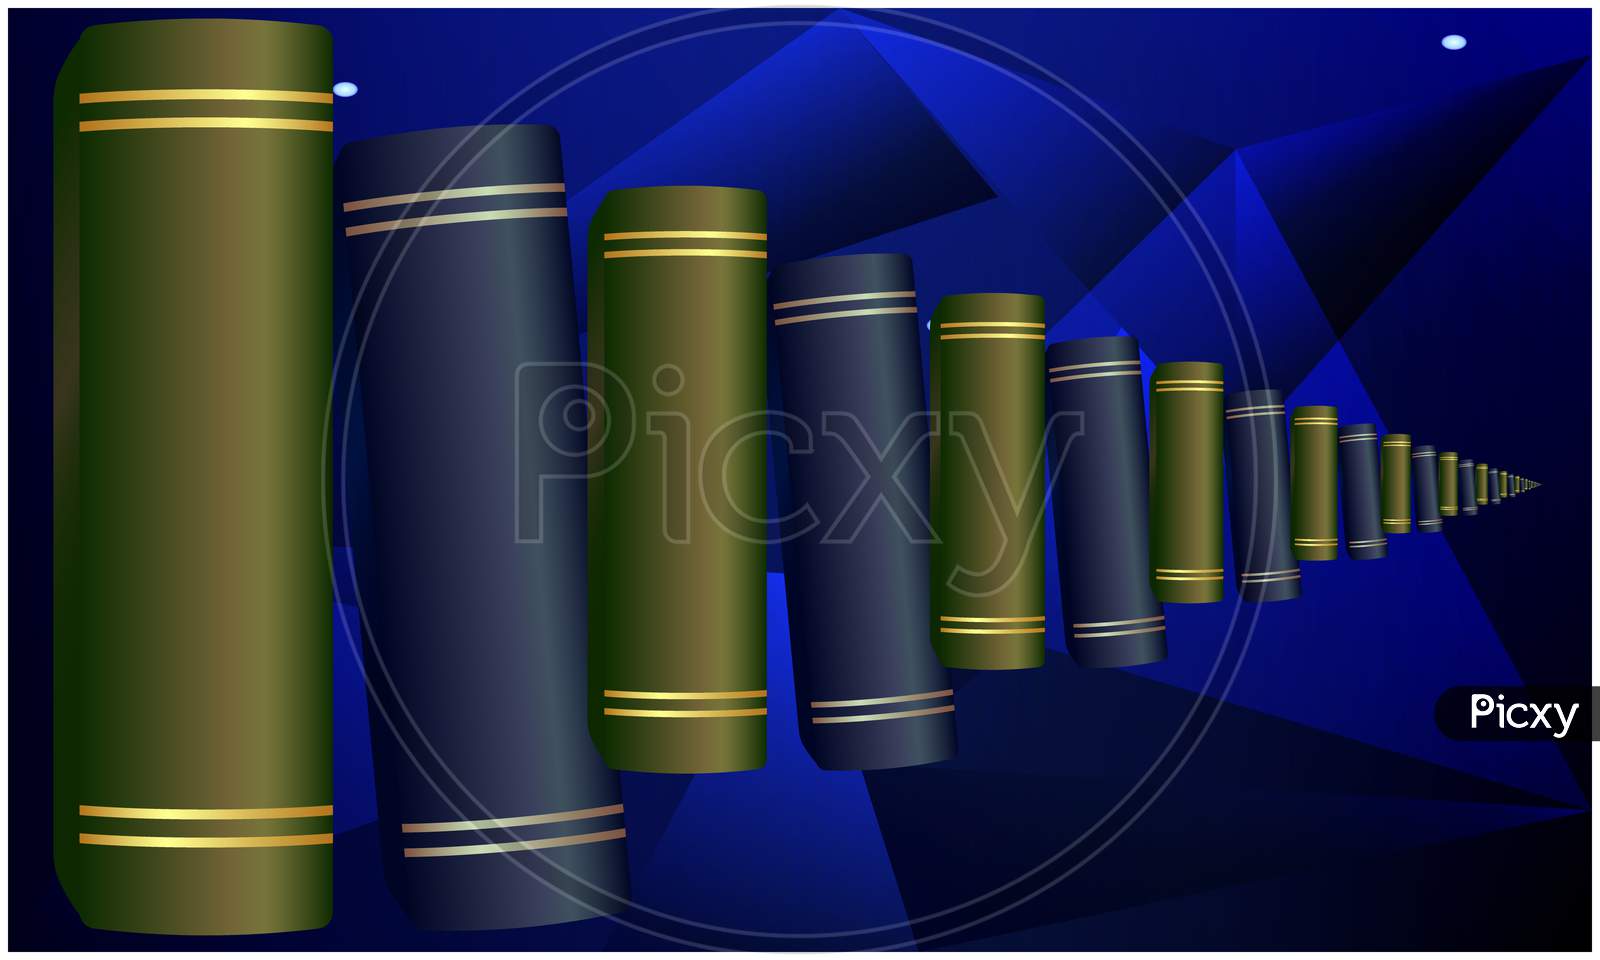 Digital Textile Design Of Book On Abstract Background